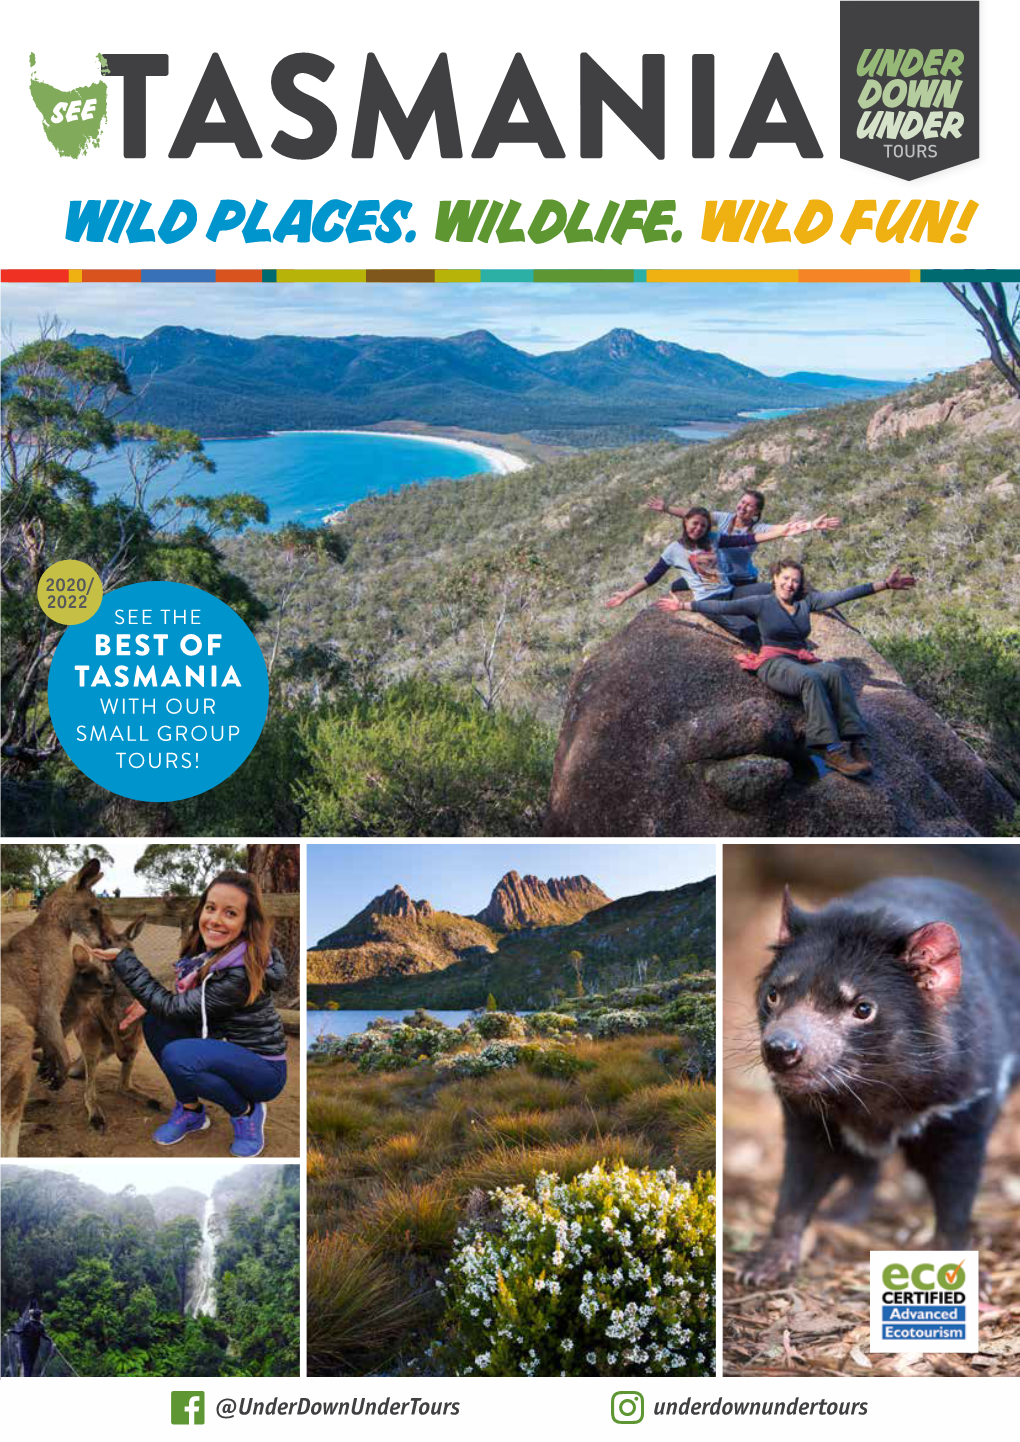 Best of Tasmania with Our Small Group Tours!